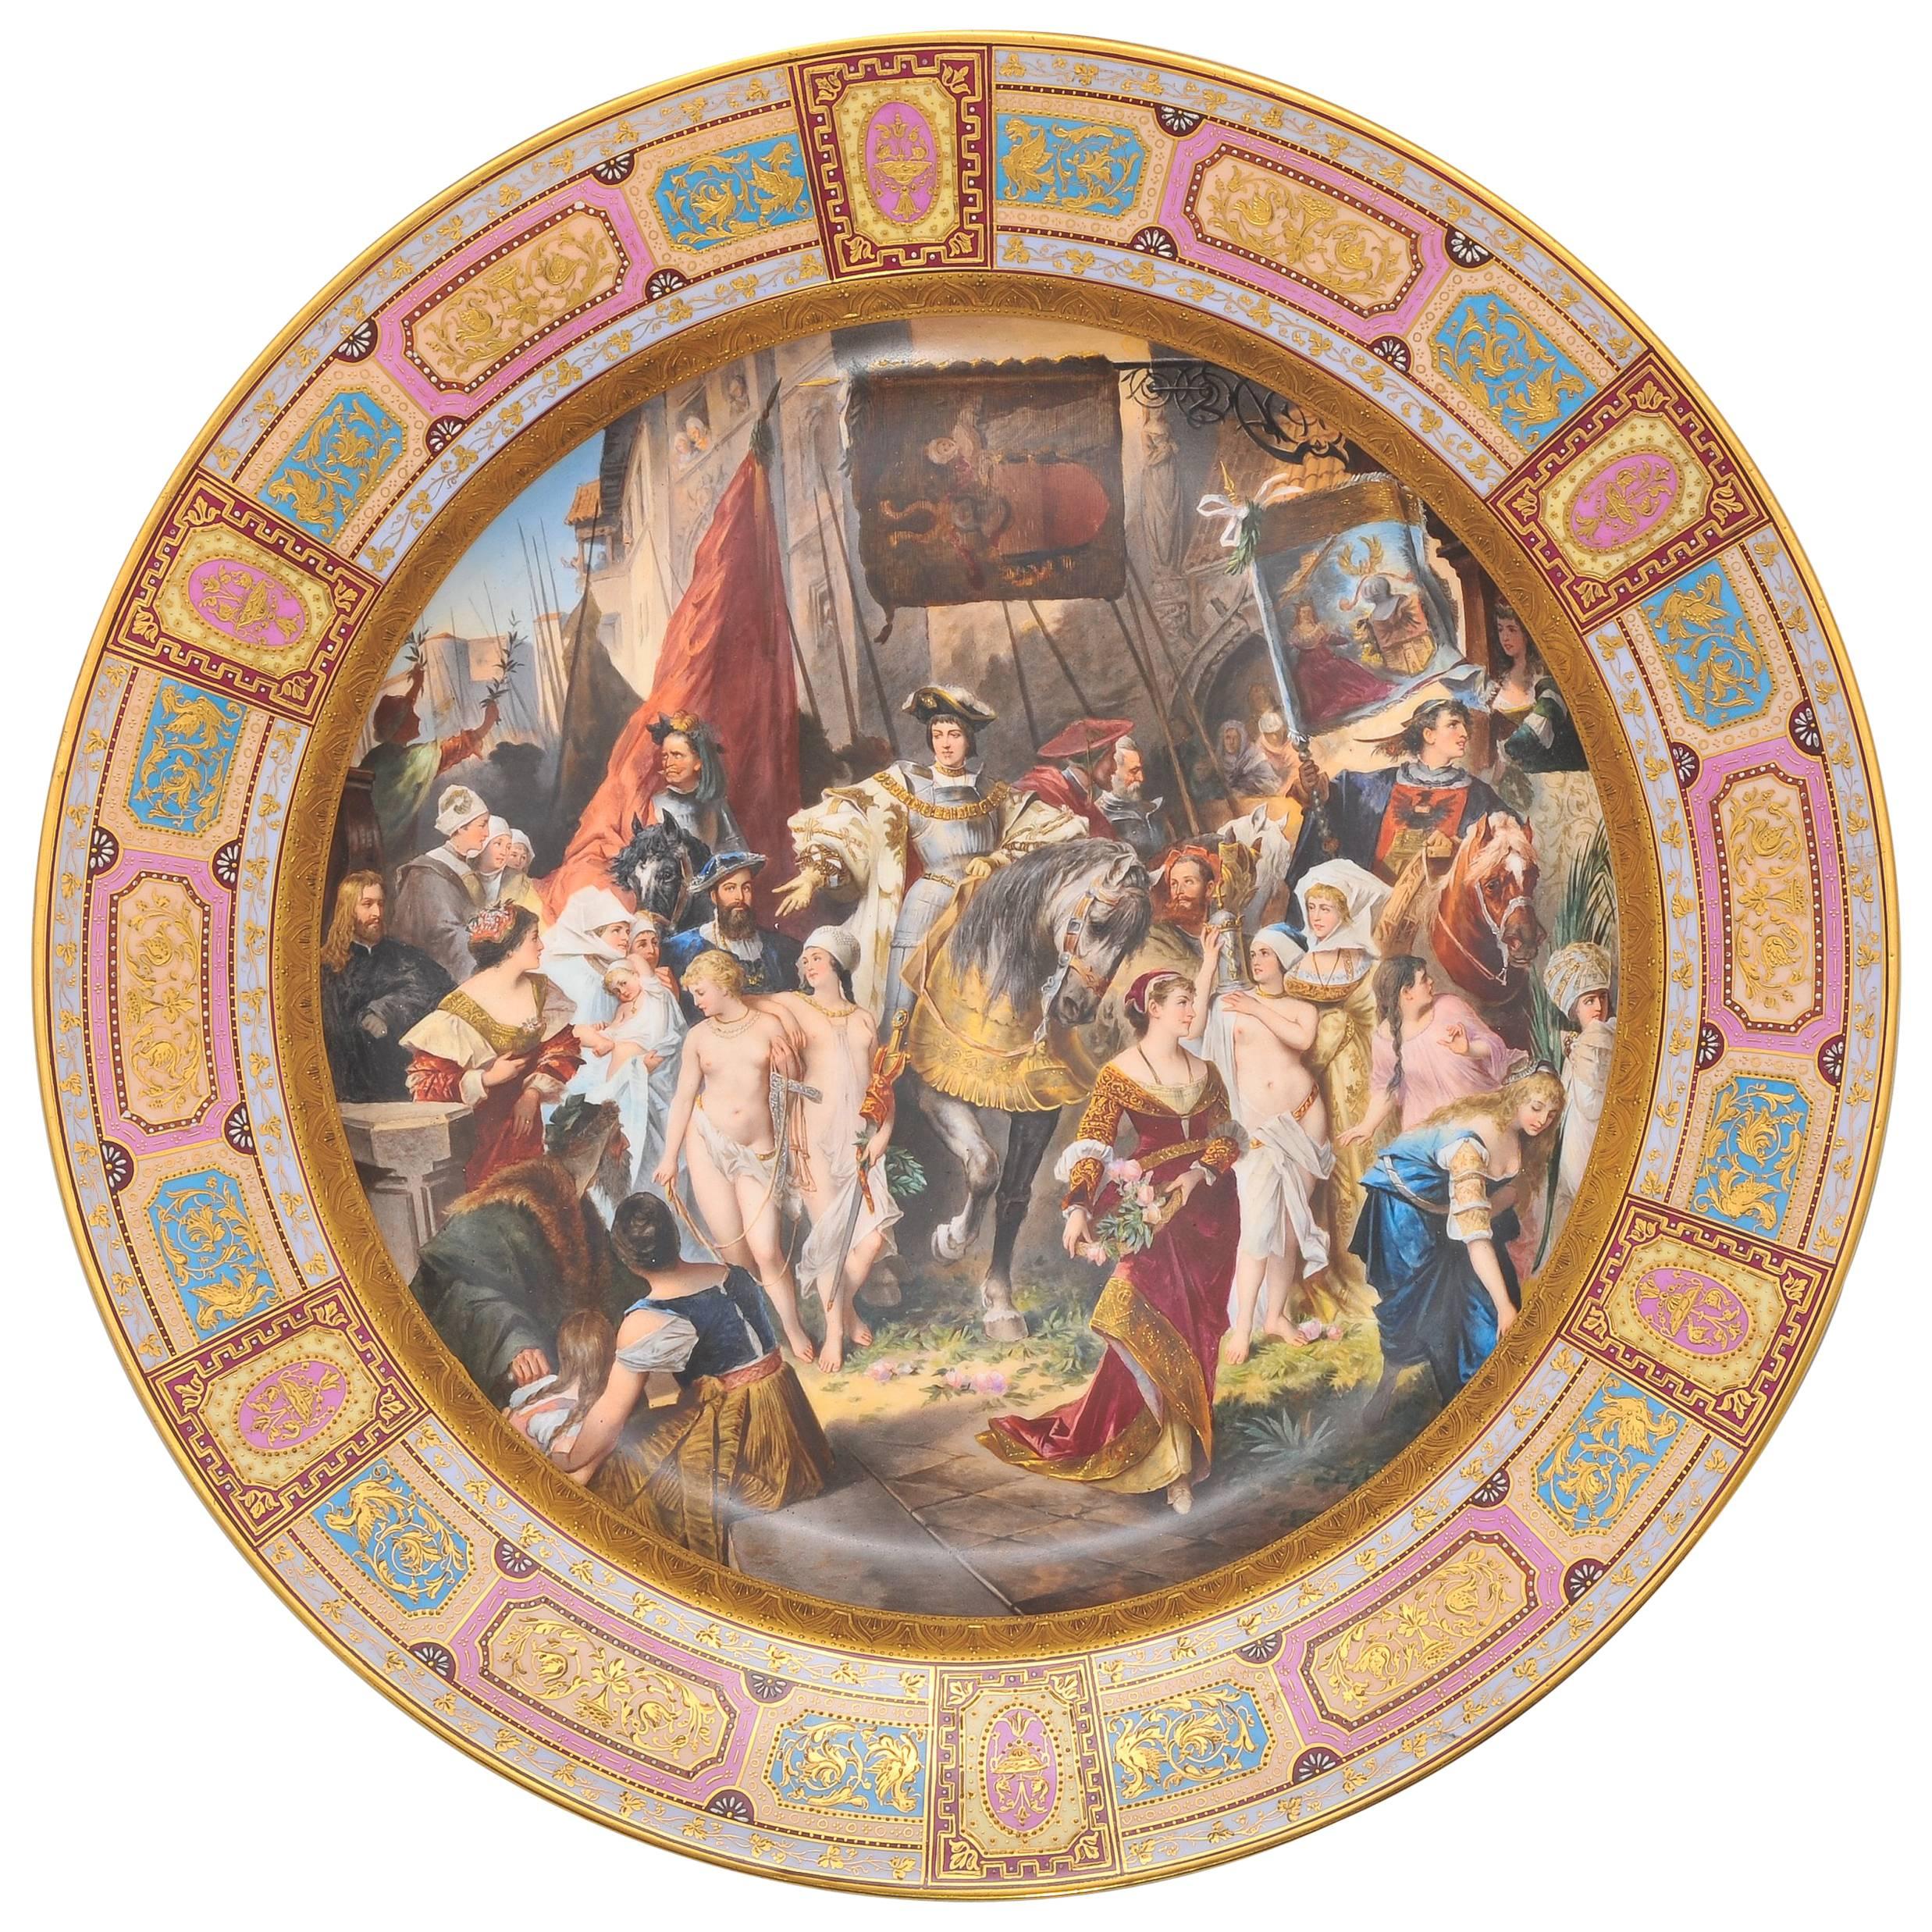 Large Vienna Porcelain Charger, 19th Century